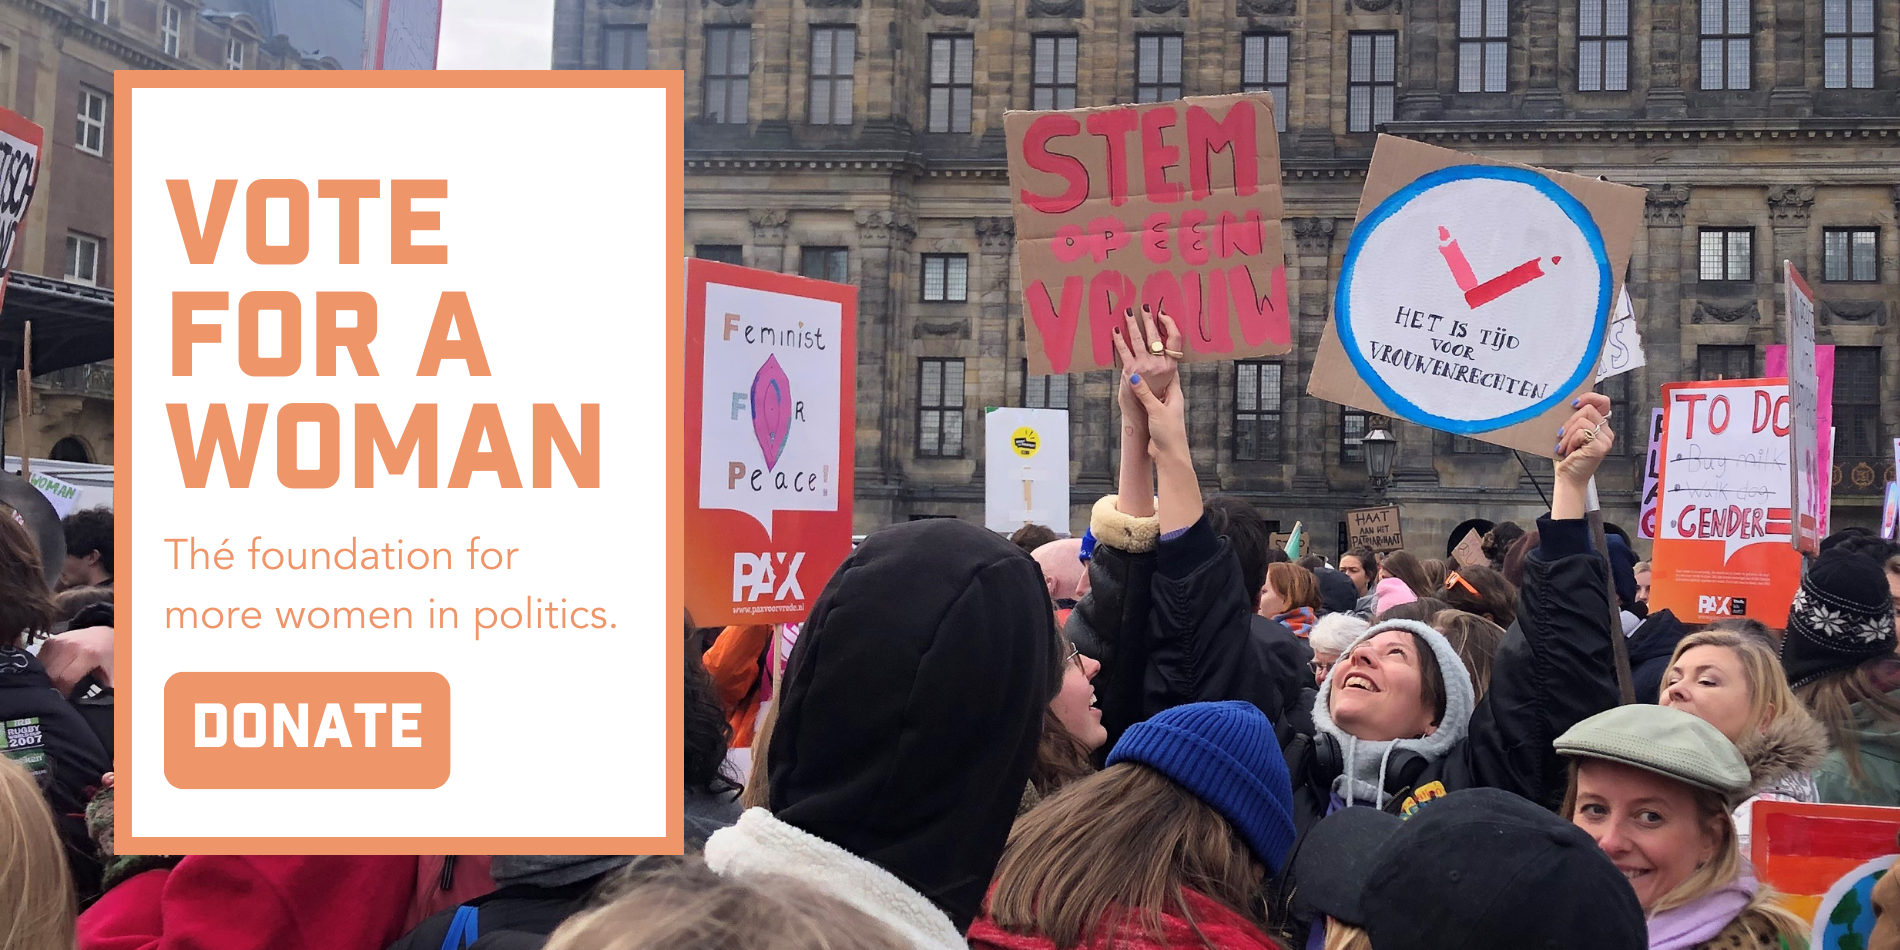 Image of the Women's March. A young woman holds up the sign: Vote for a Woman. There is a textbox that says: Vote for a Woman. The foundation for more women in Dutch politics. DONATE (click on the image)